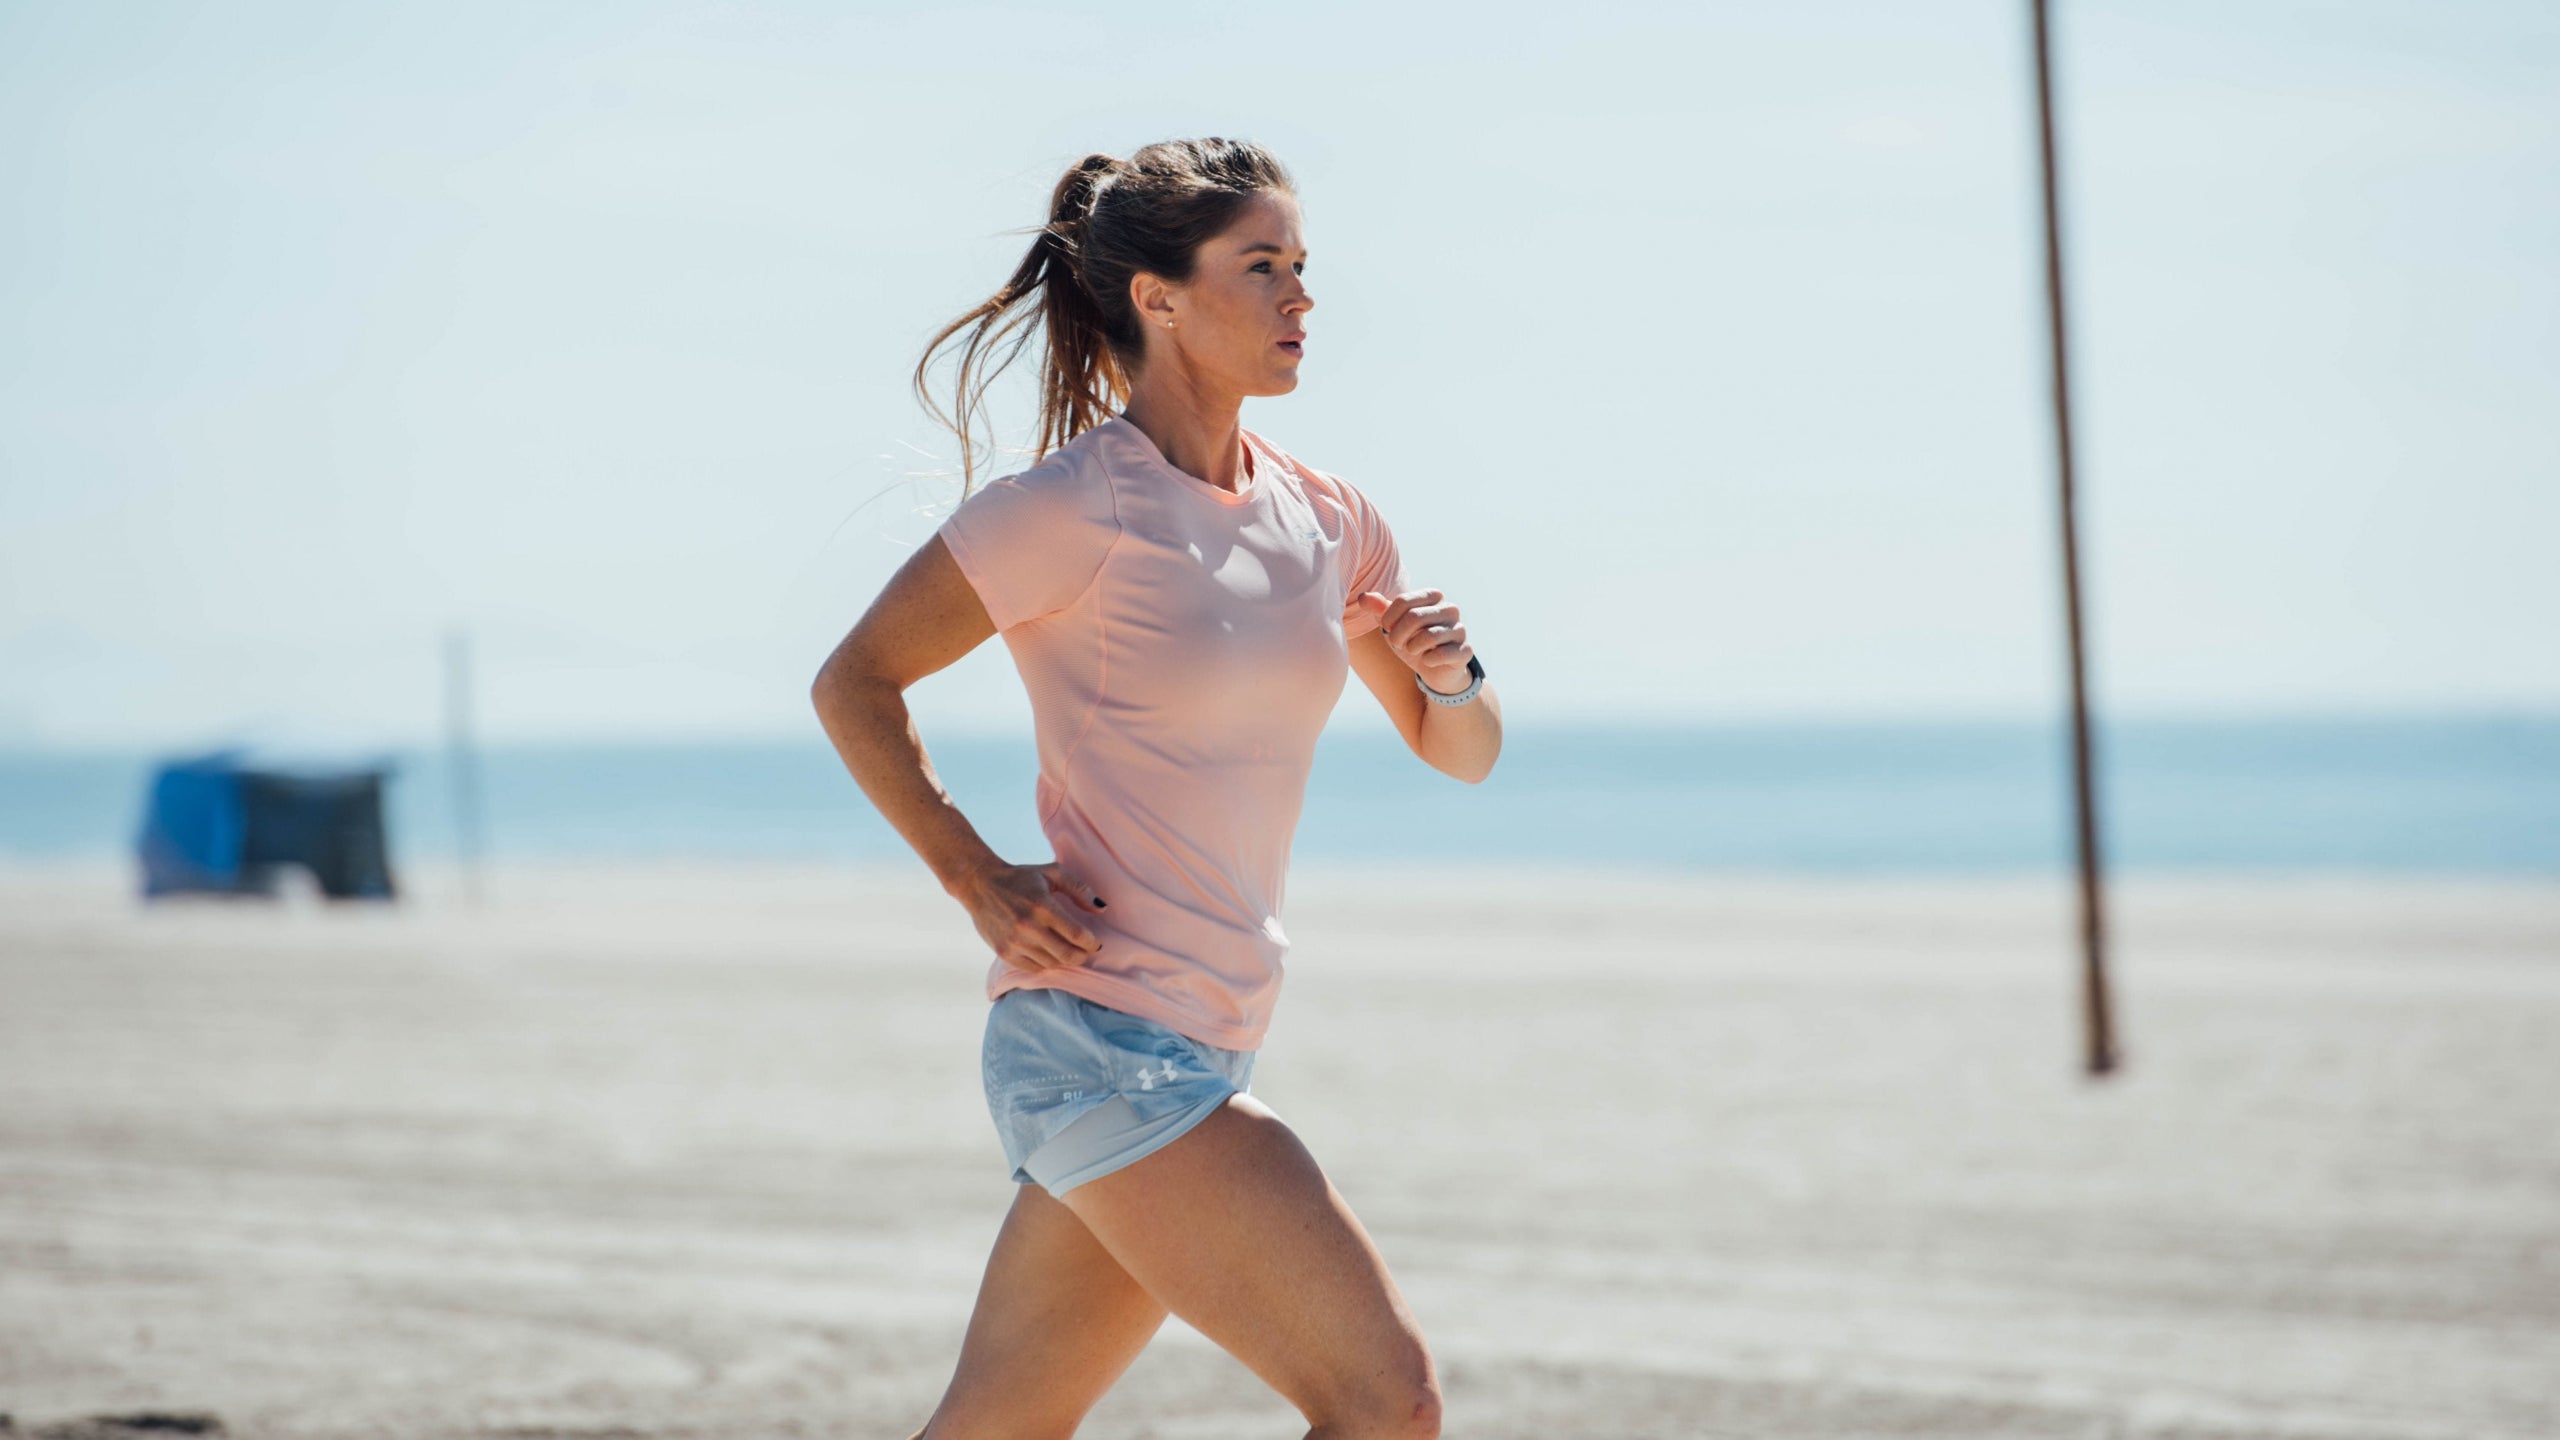 Woman running in the heat